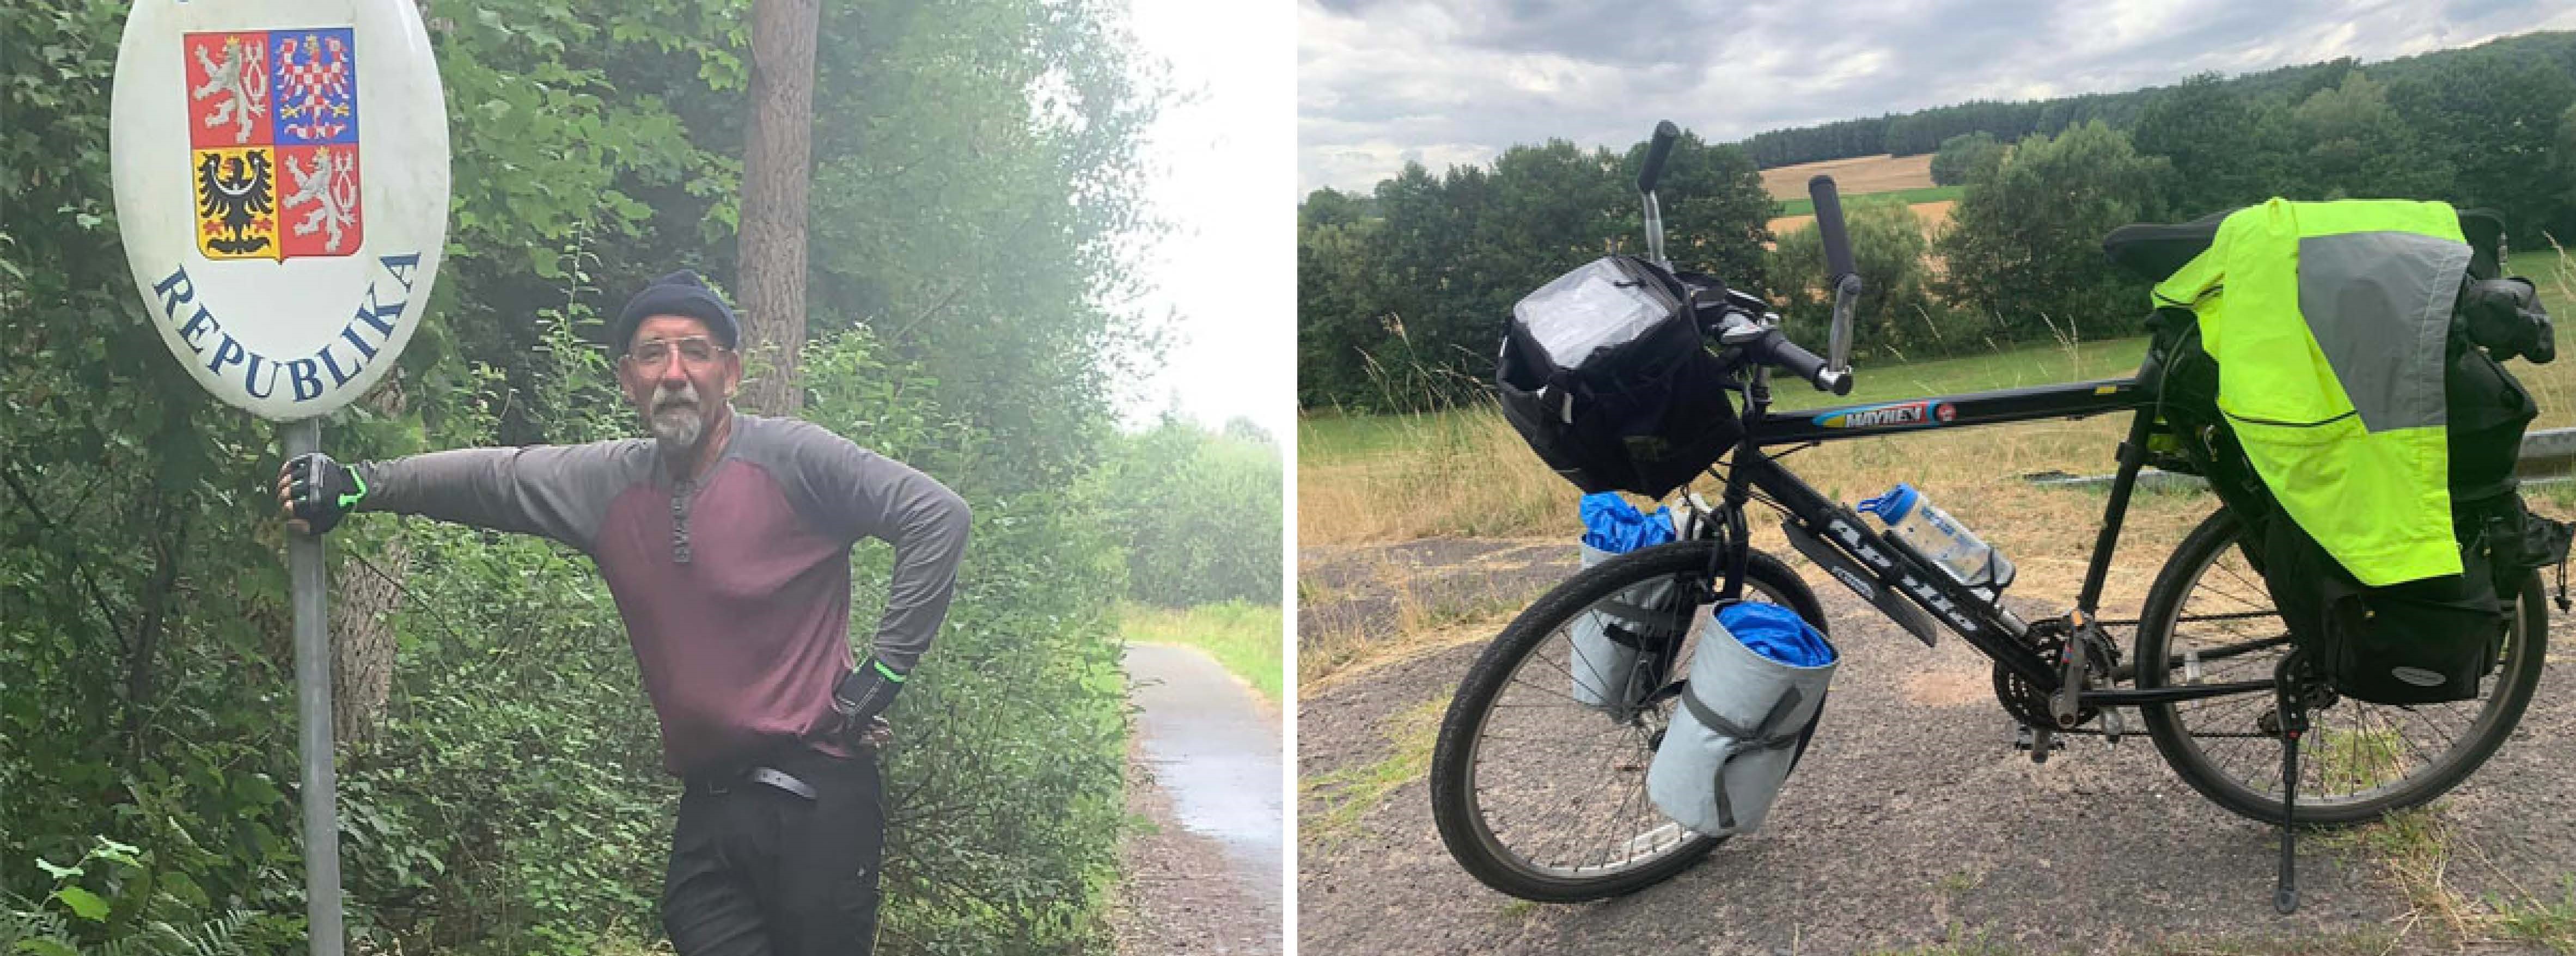 Two photos: the left shows a photo of Keith at his final stop of his Jailbrerak in the Czech Republic. He is leaning on a roadsign. The right photo shows Keith's £10 bike that he used for his fundraiser. It has all his supplies attached to it.